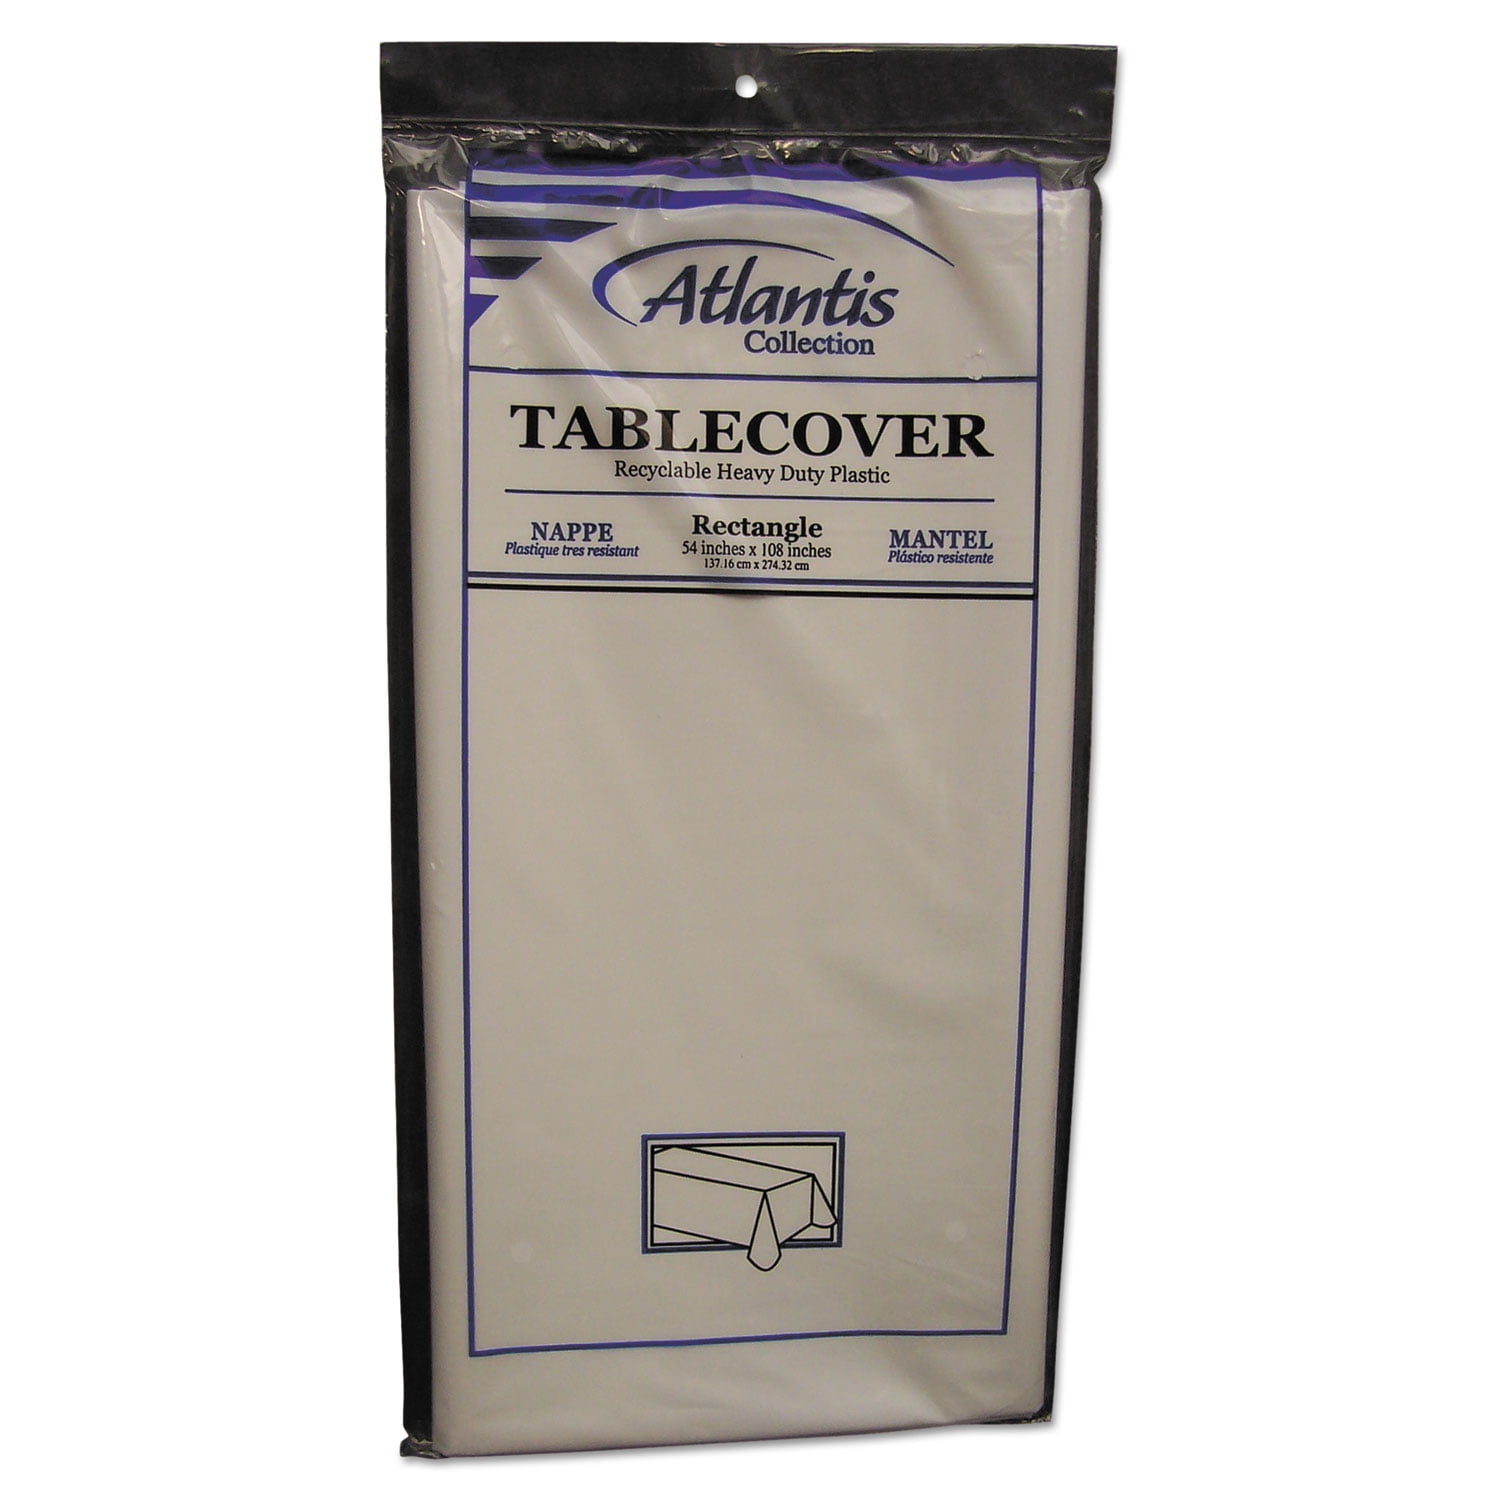 BCW-MAG-M4 Magazine Mylar Sleeves 4mil Bags Covers Store Protect Archival 250 